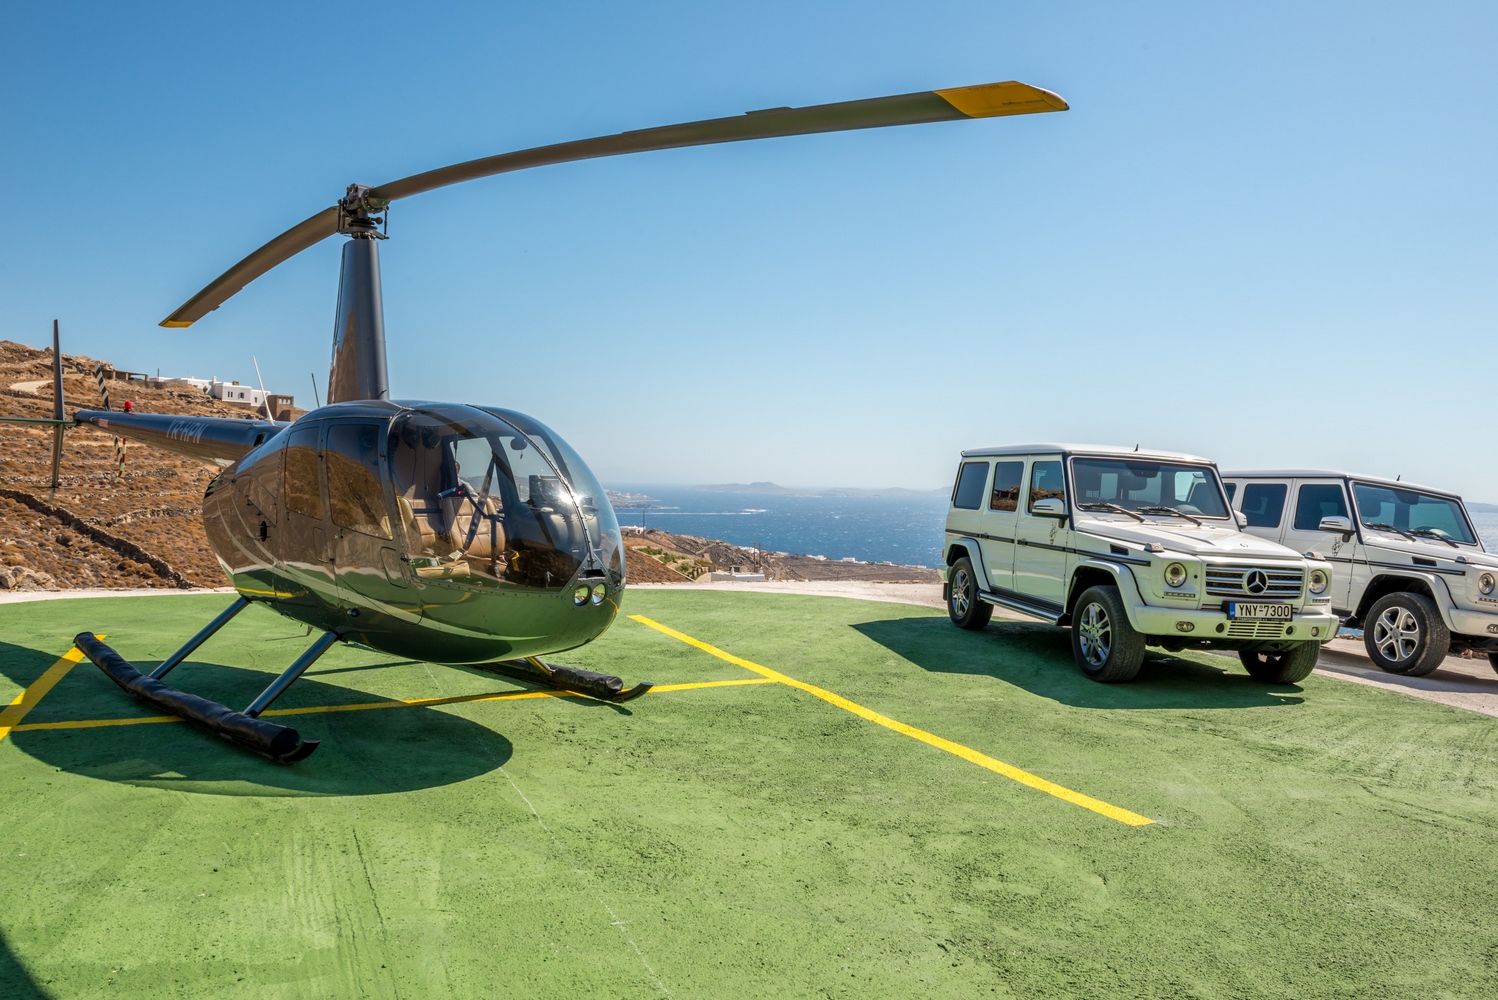 Helicopter and two Mercedes cars